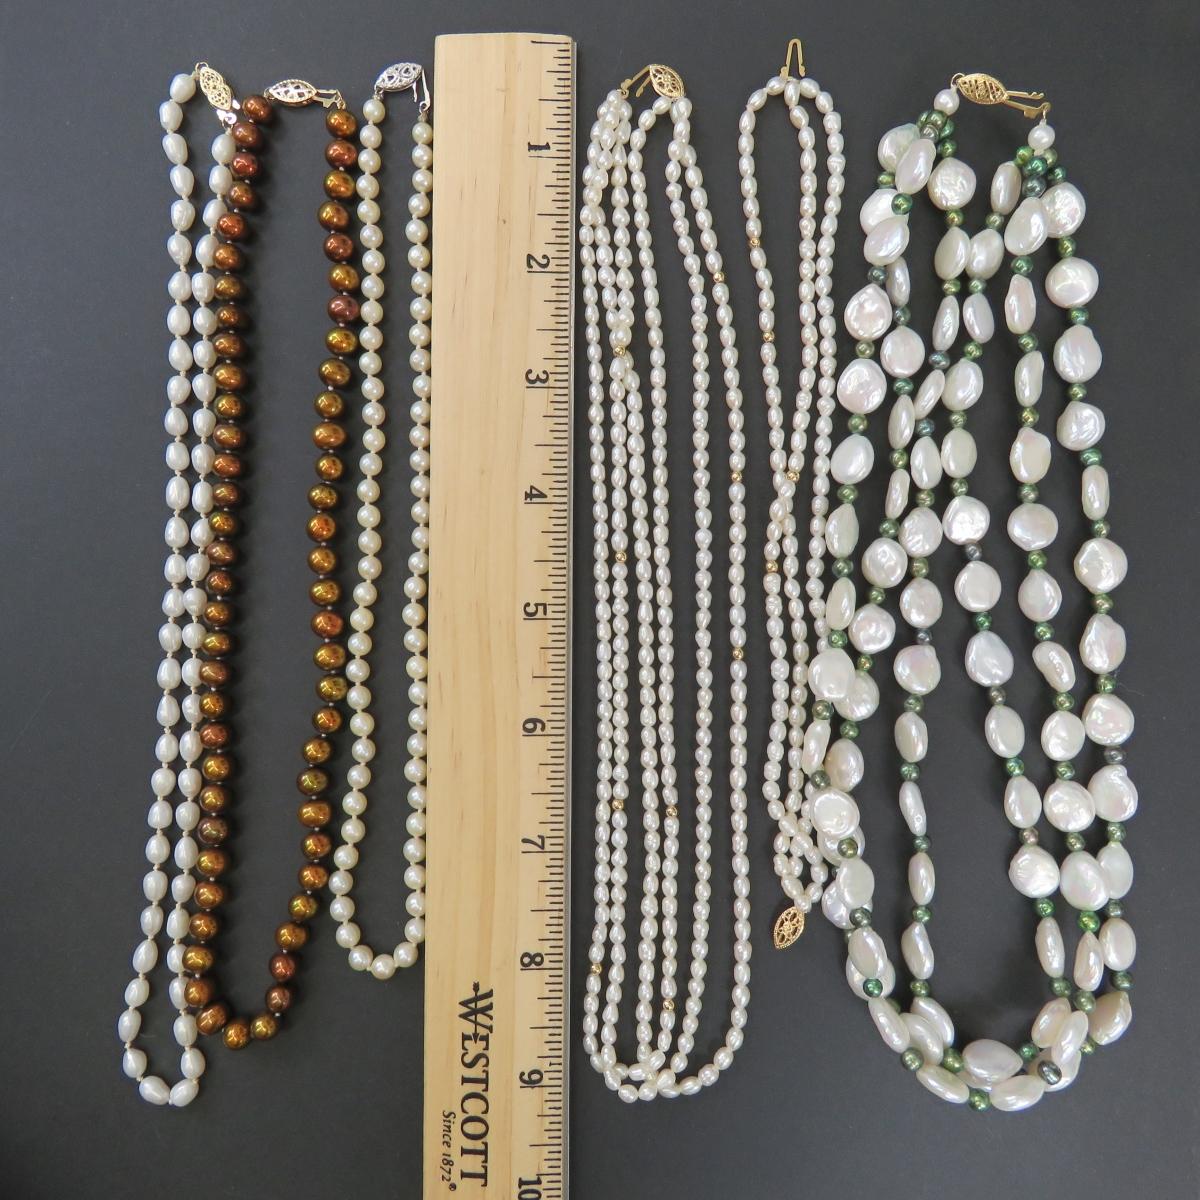 Pearl & Fresh Water Pearl Necklaces